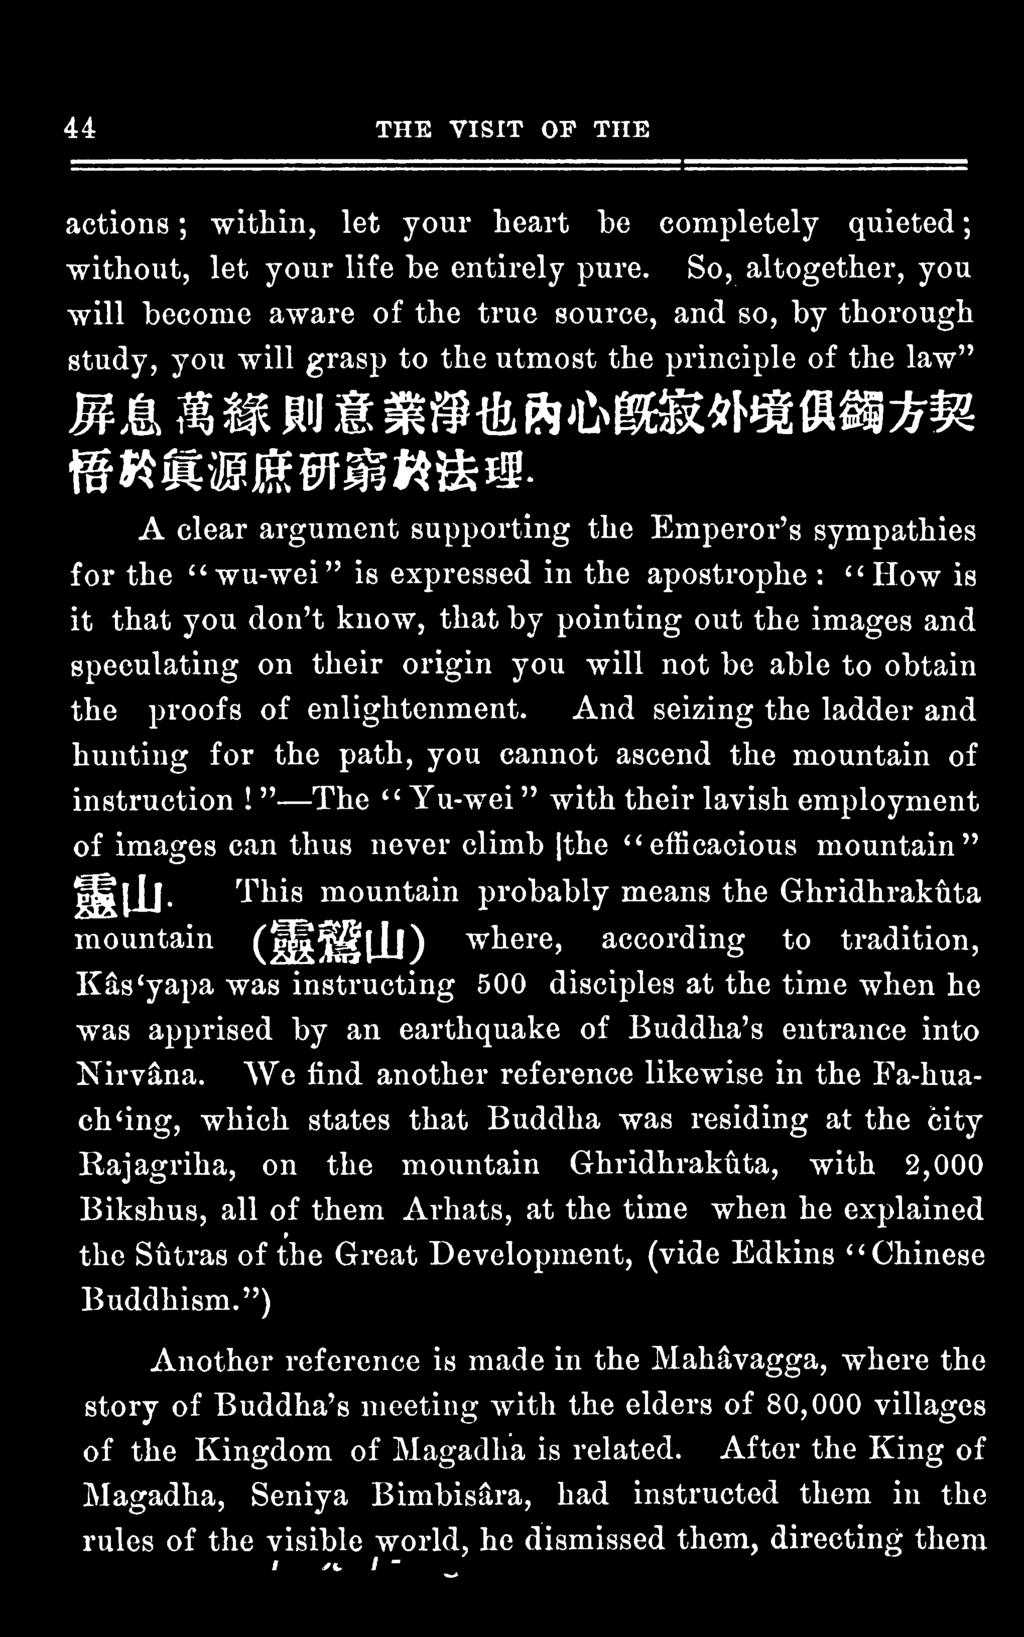 the " wu-wei" is expressed in the apostrophe : it "How is that you don't know, that by pointing out the images and speculating on their origin you will not be able to obtain the proofs of